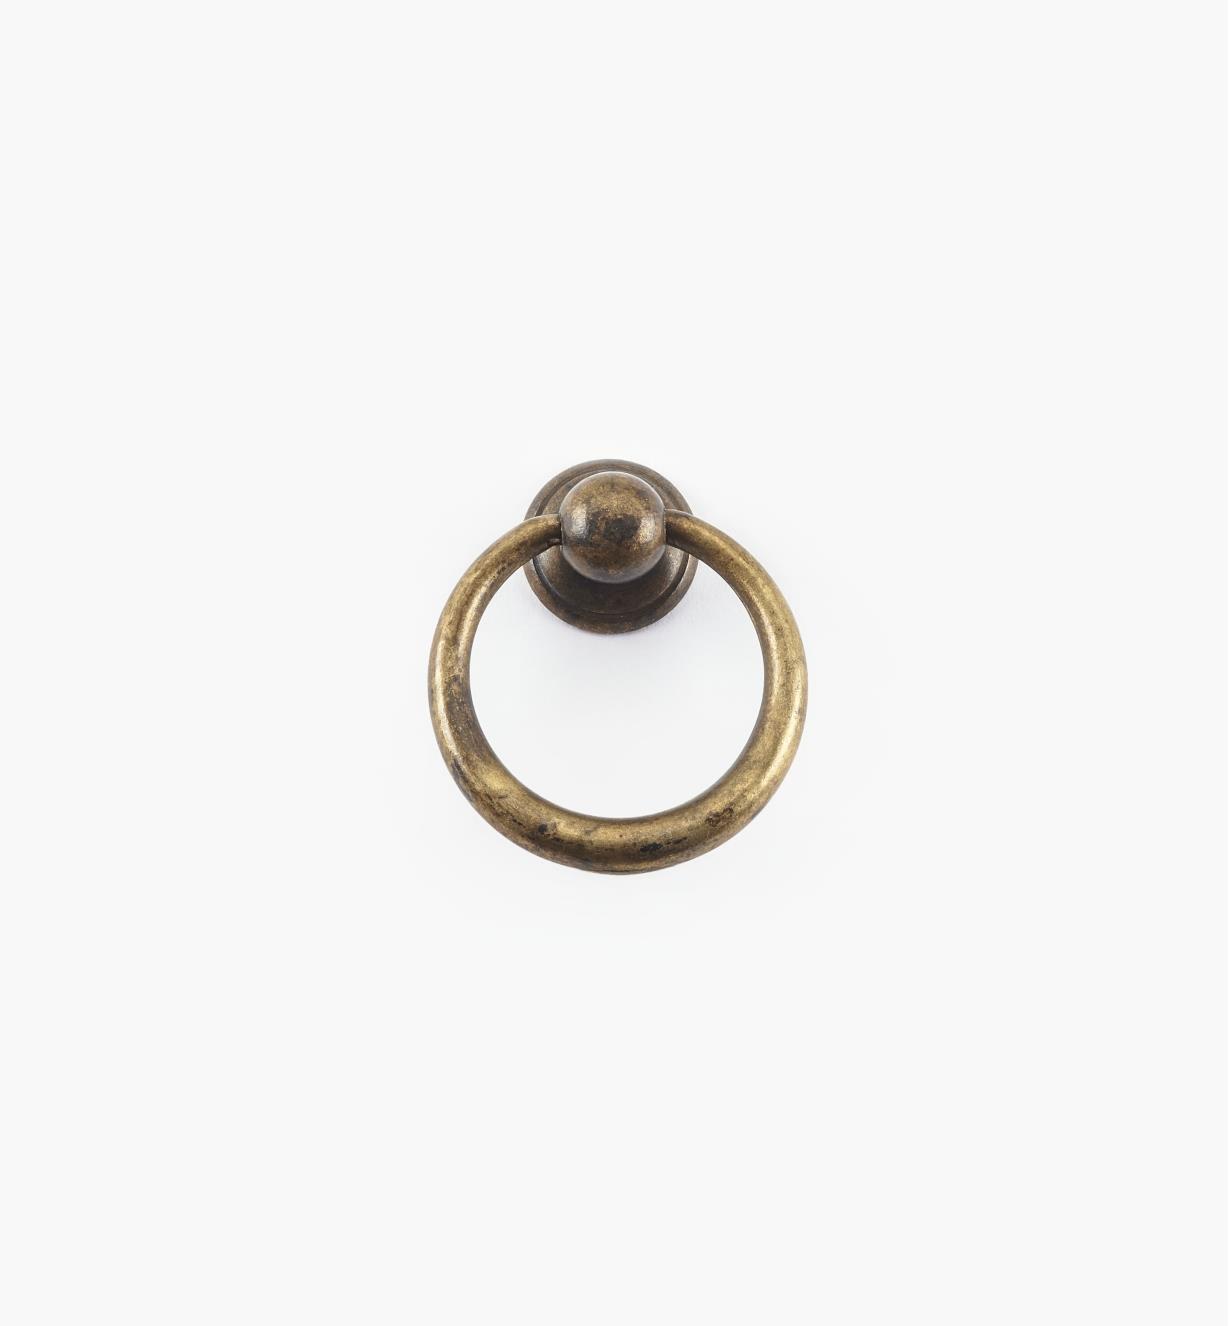 01A2302 - 33mm x 39mm Round Plate Ring Pull